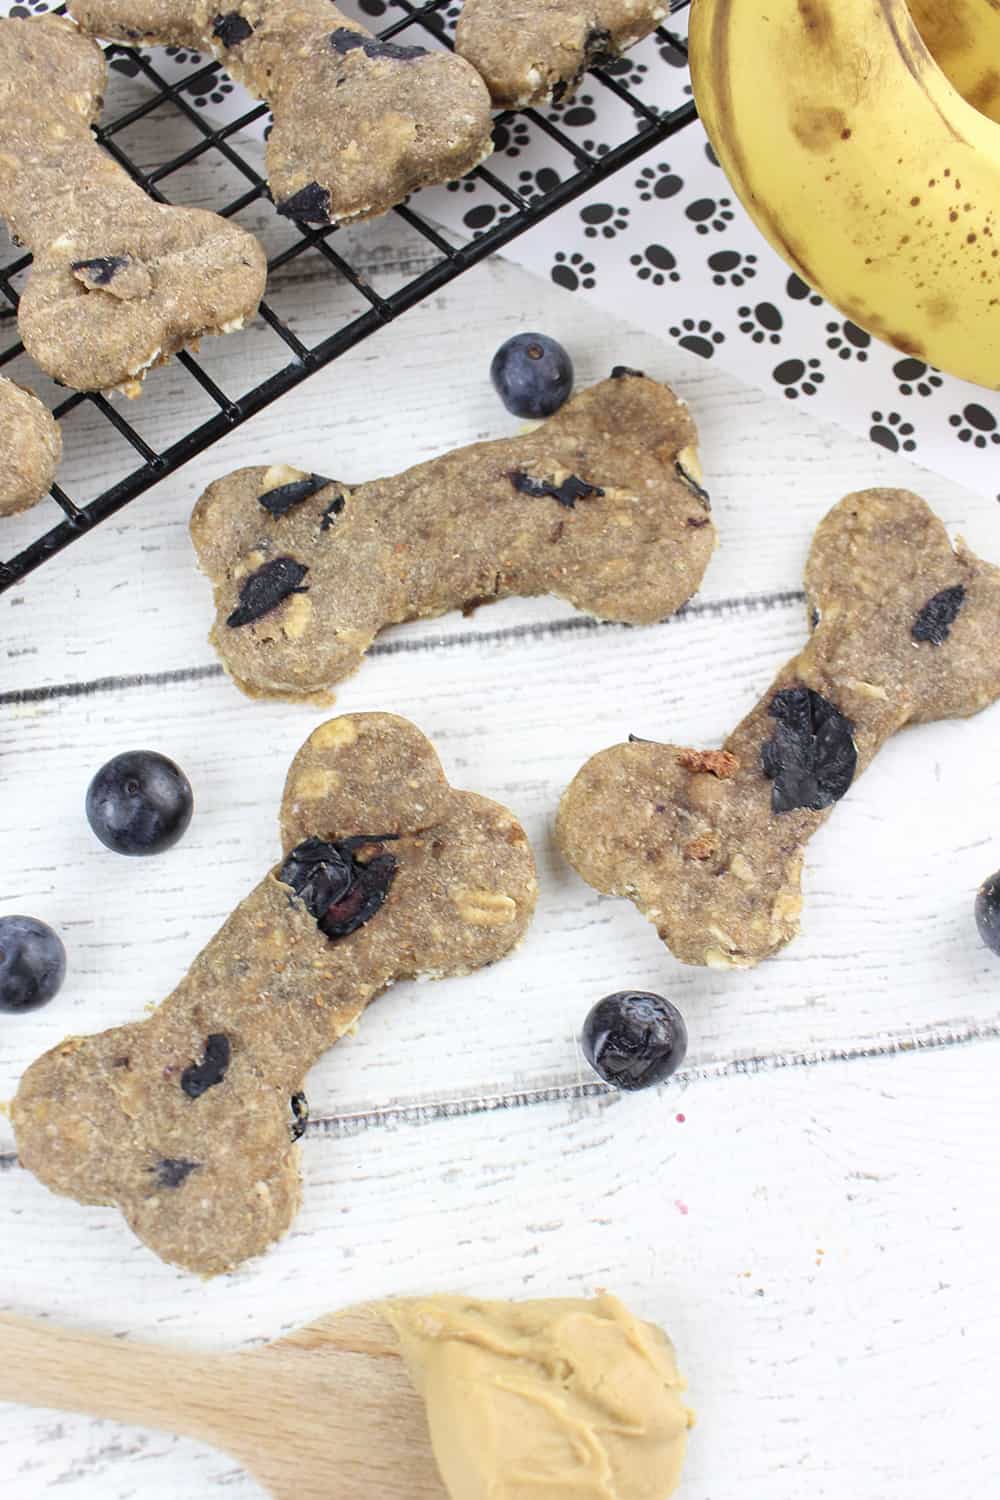 Homemade dog treats can be incredibly easy. See just how easy these peanut butter banana oatmeal dog treats are!